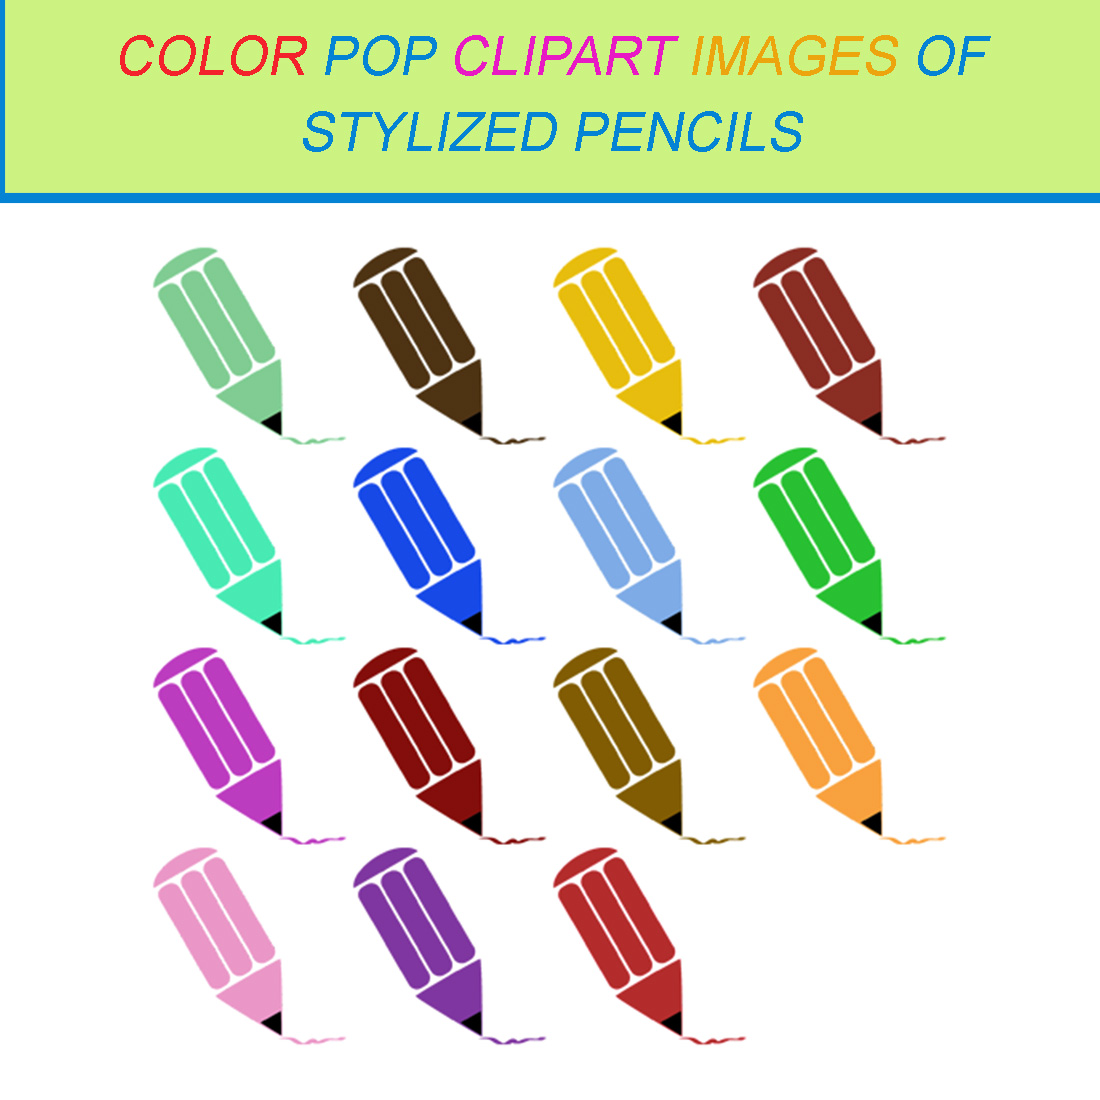 15 COLOR POP CLIPART IMAGES OF STYLIZED PENCILS cover image.